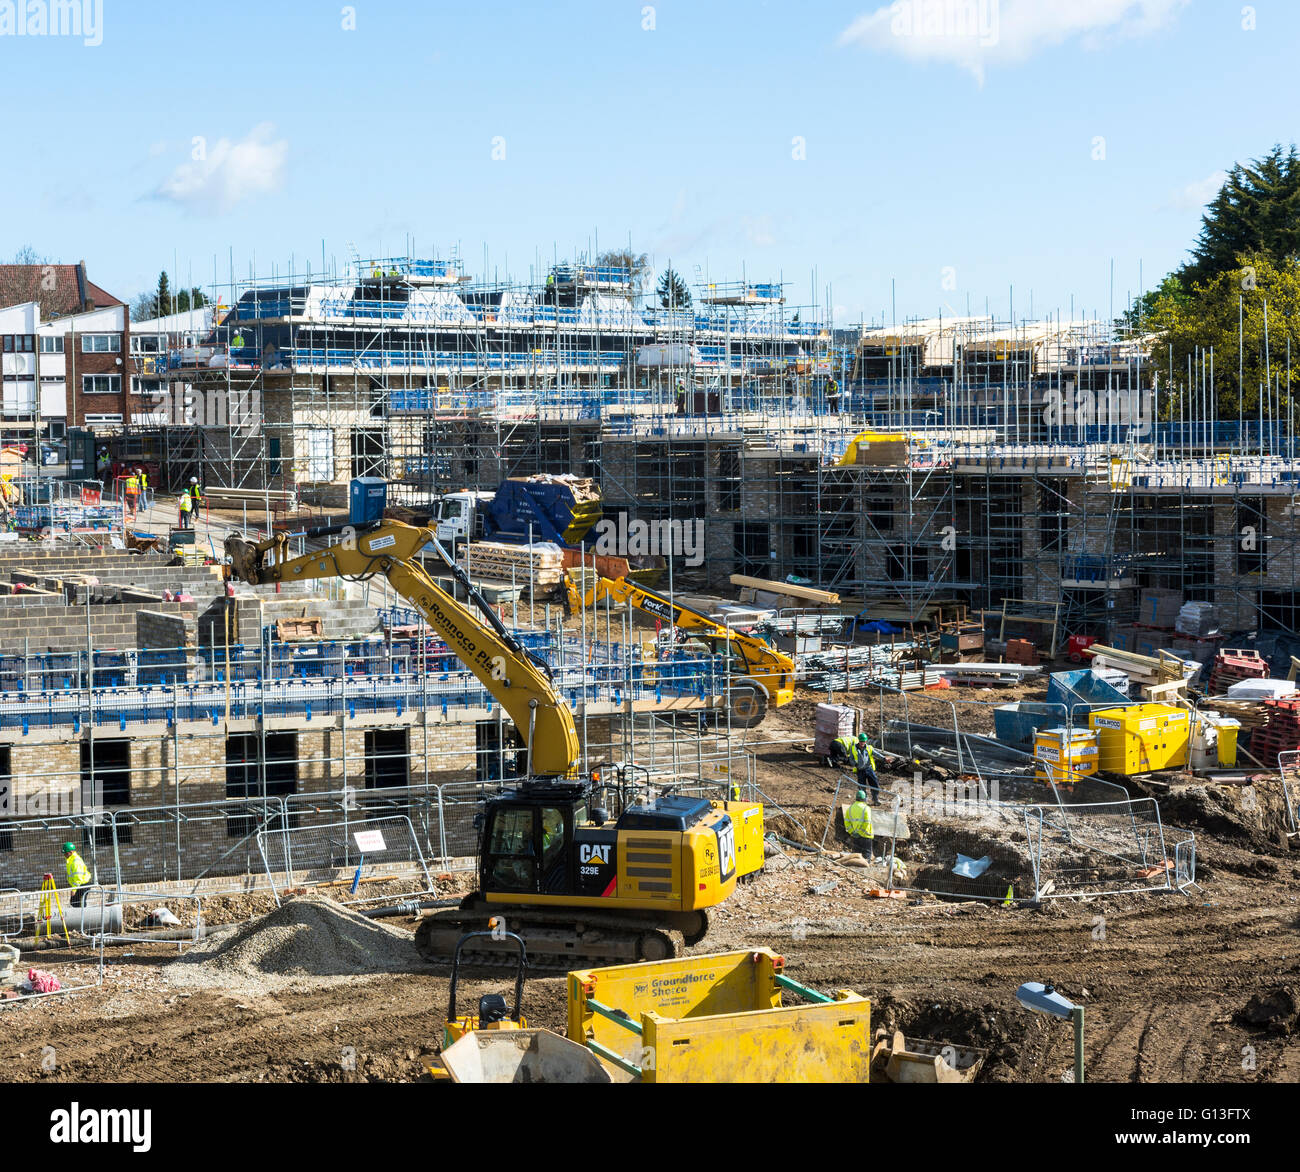 Construction site of new homes in London England. Workers working on building houses and low rise apartments/flats Stock Photo